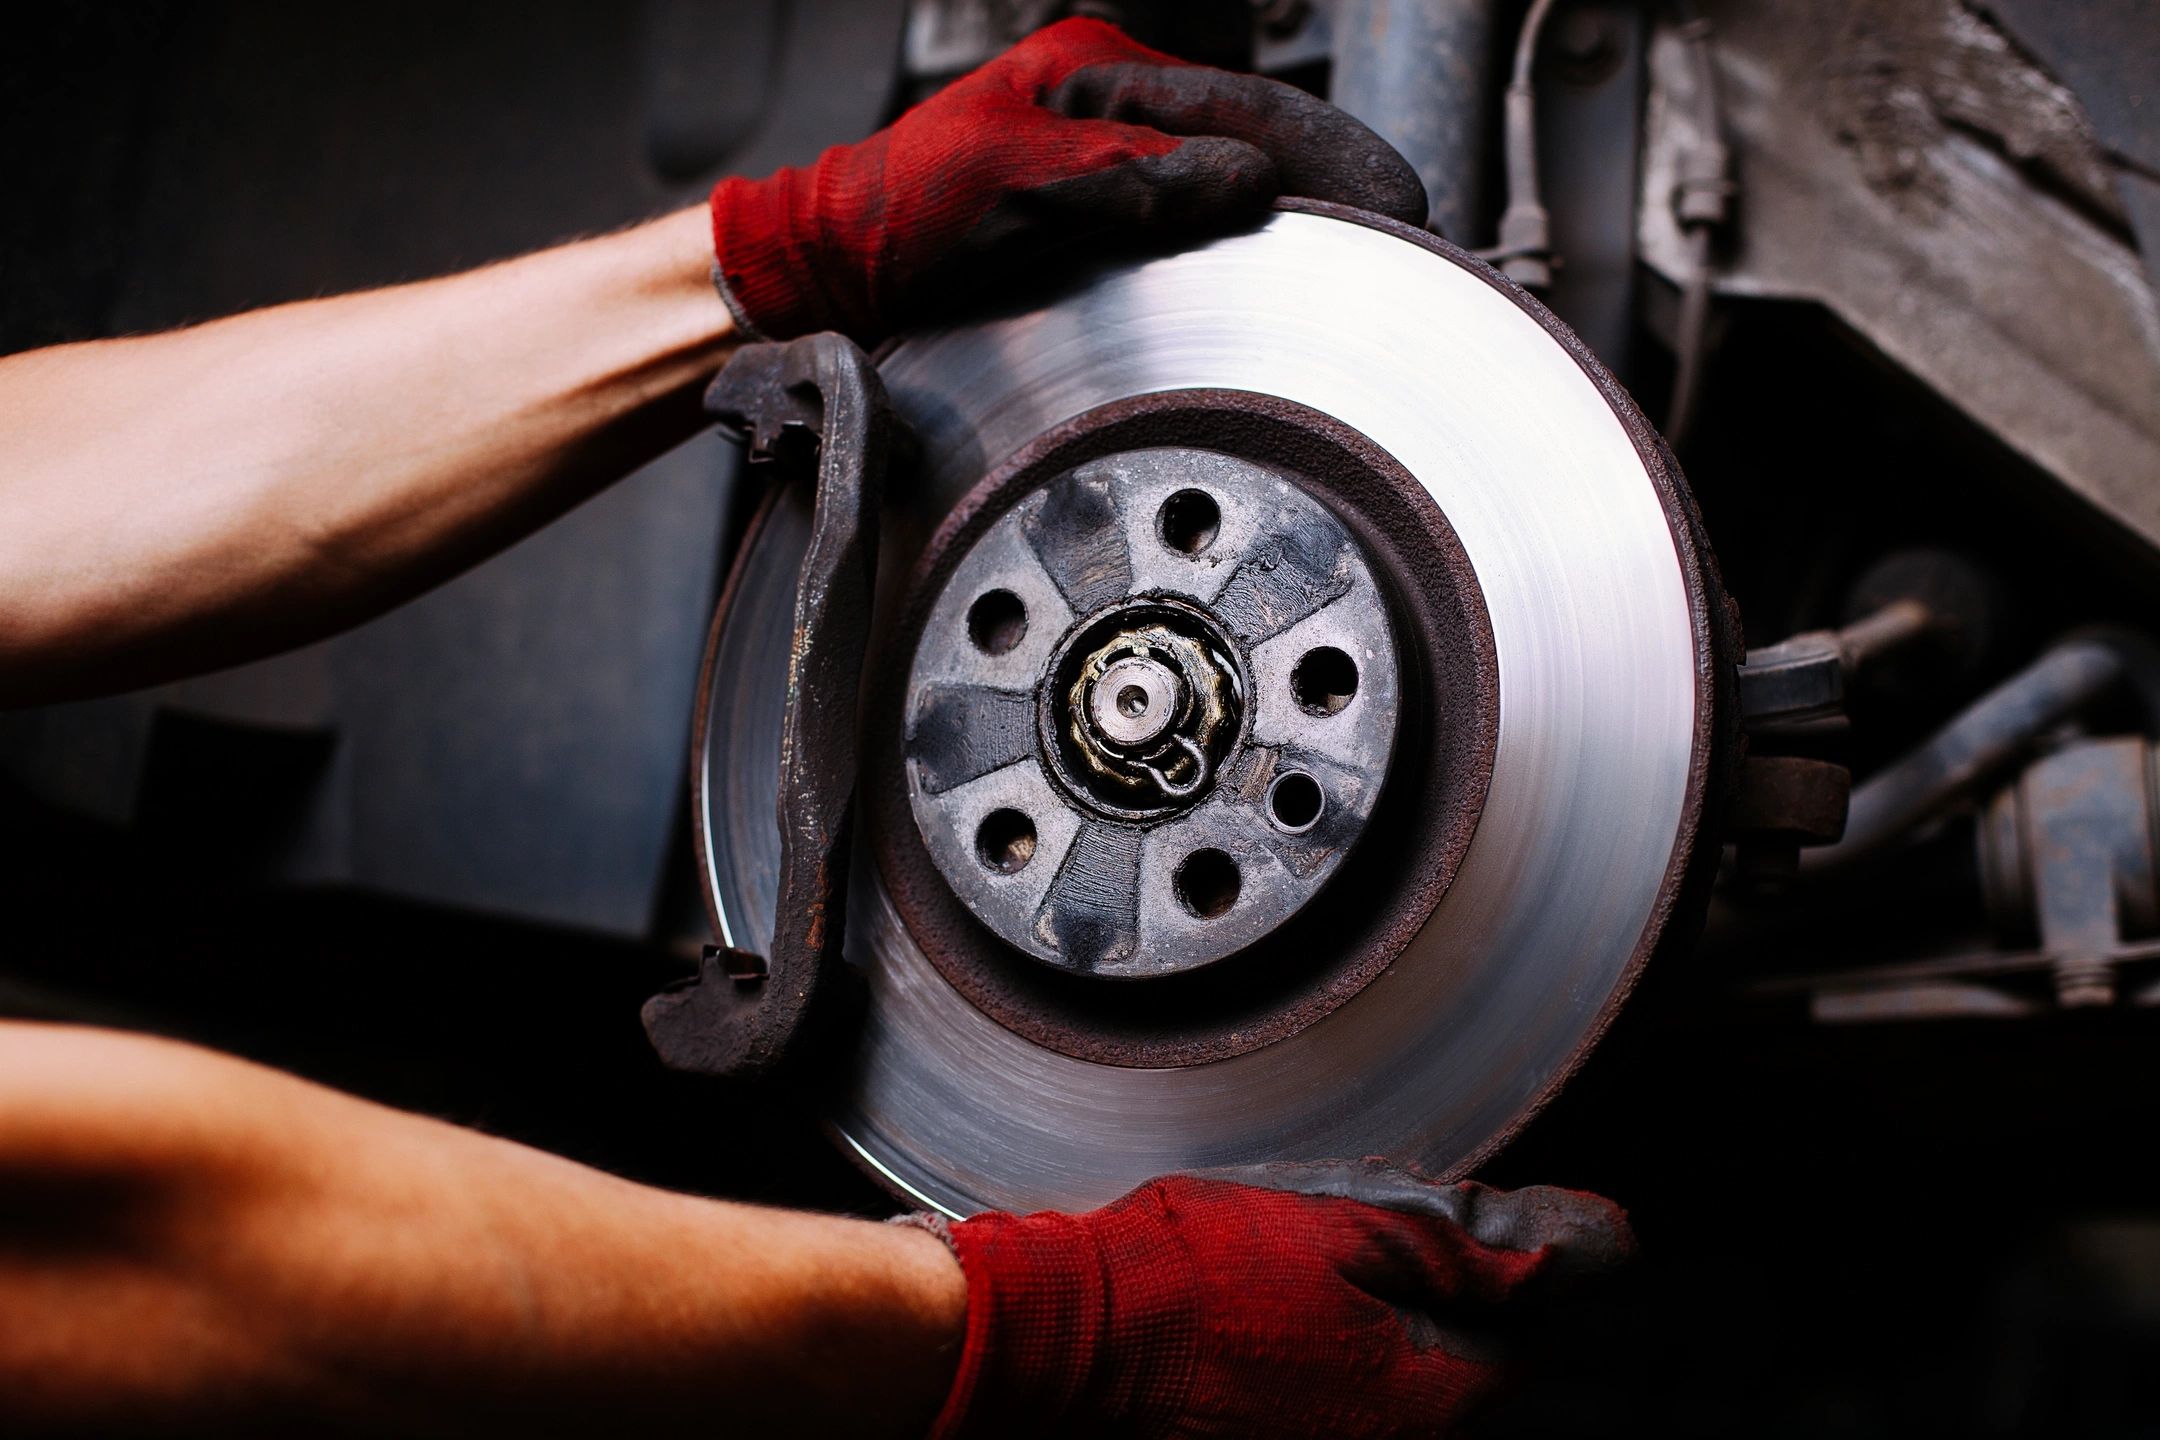 DOT Inspections, replace brake pads, shoes, disc rotors, bearings, and bushings.